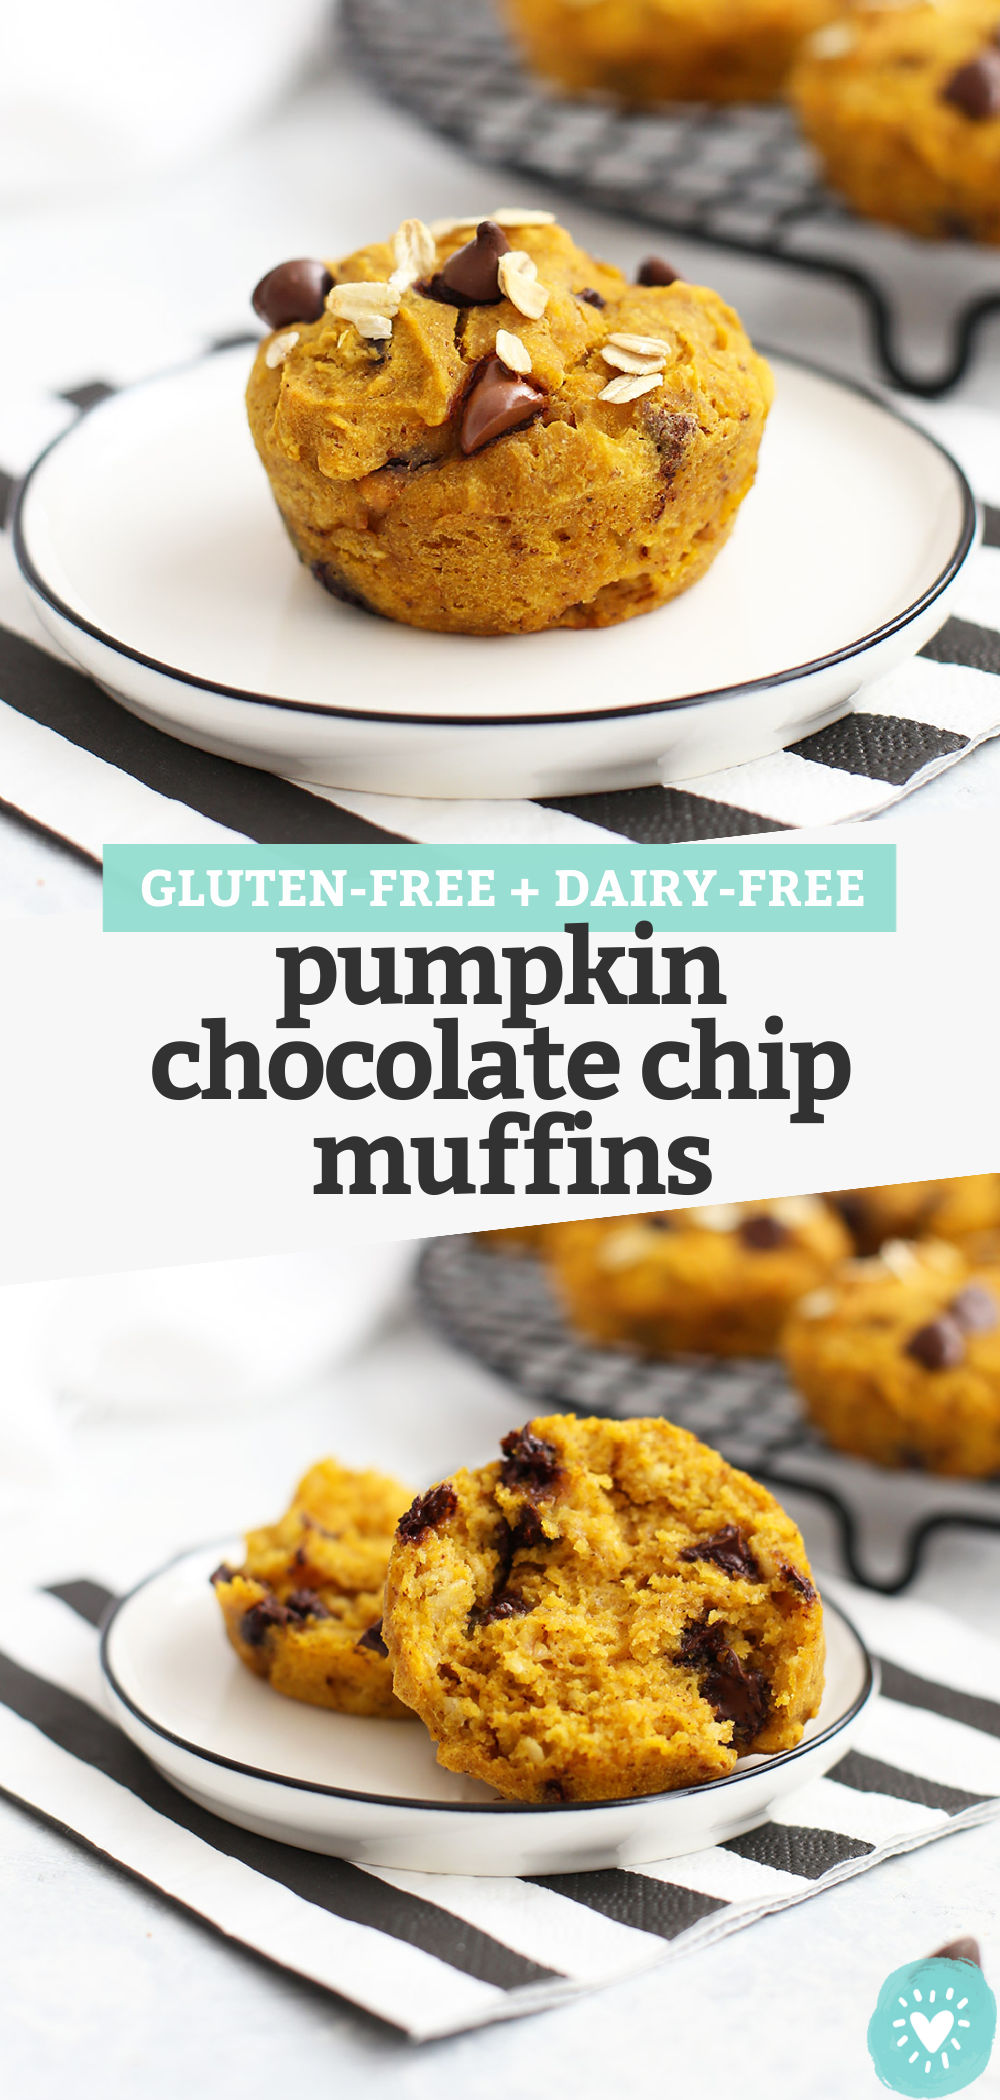 Collage of Images of Gluten Free Pumpkin Chocolate Chip Muffins with text overlay that reads "Gluten-Free Dairy-Free Pumpkin Chocolate Chip Muffins"